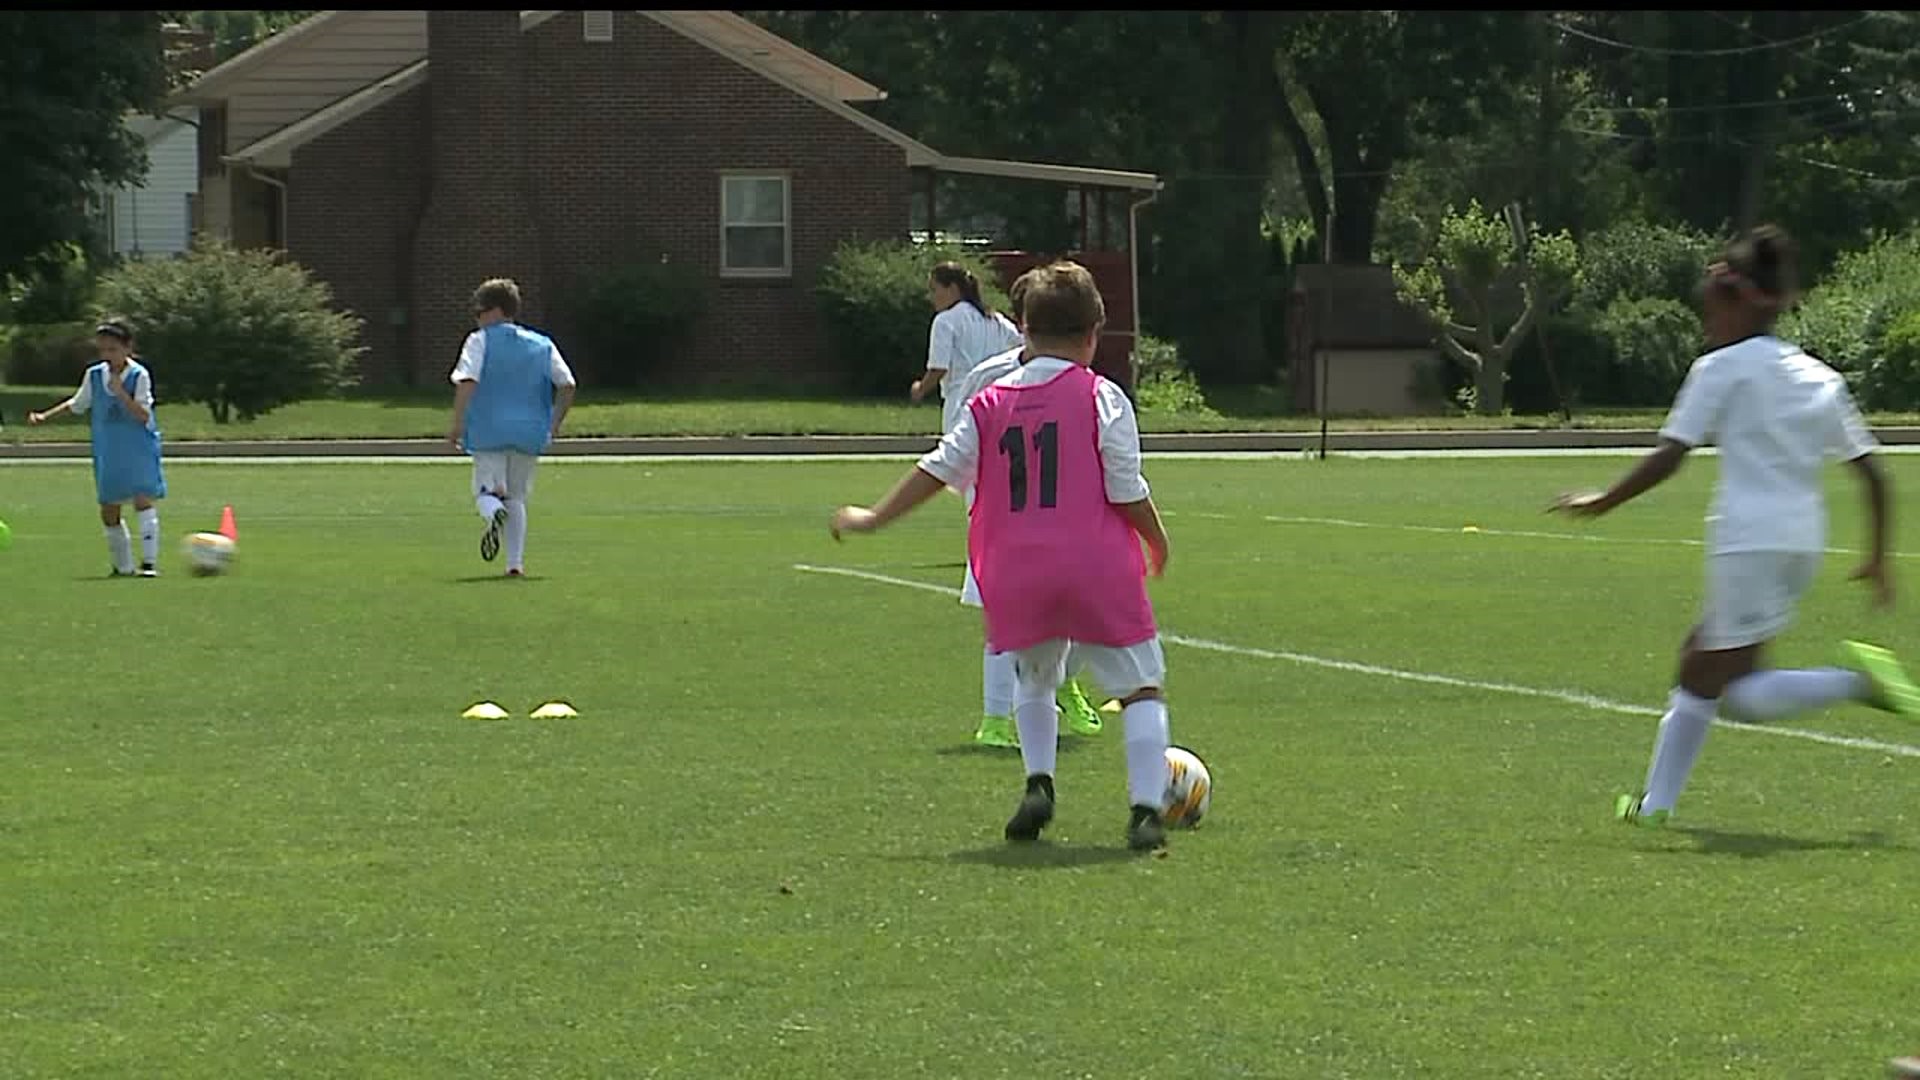 One of the world`s biggest soccer clubs makes presence felt in Lancaster County